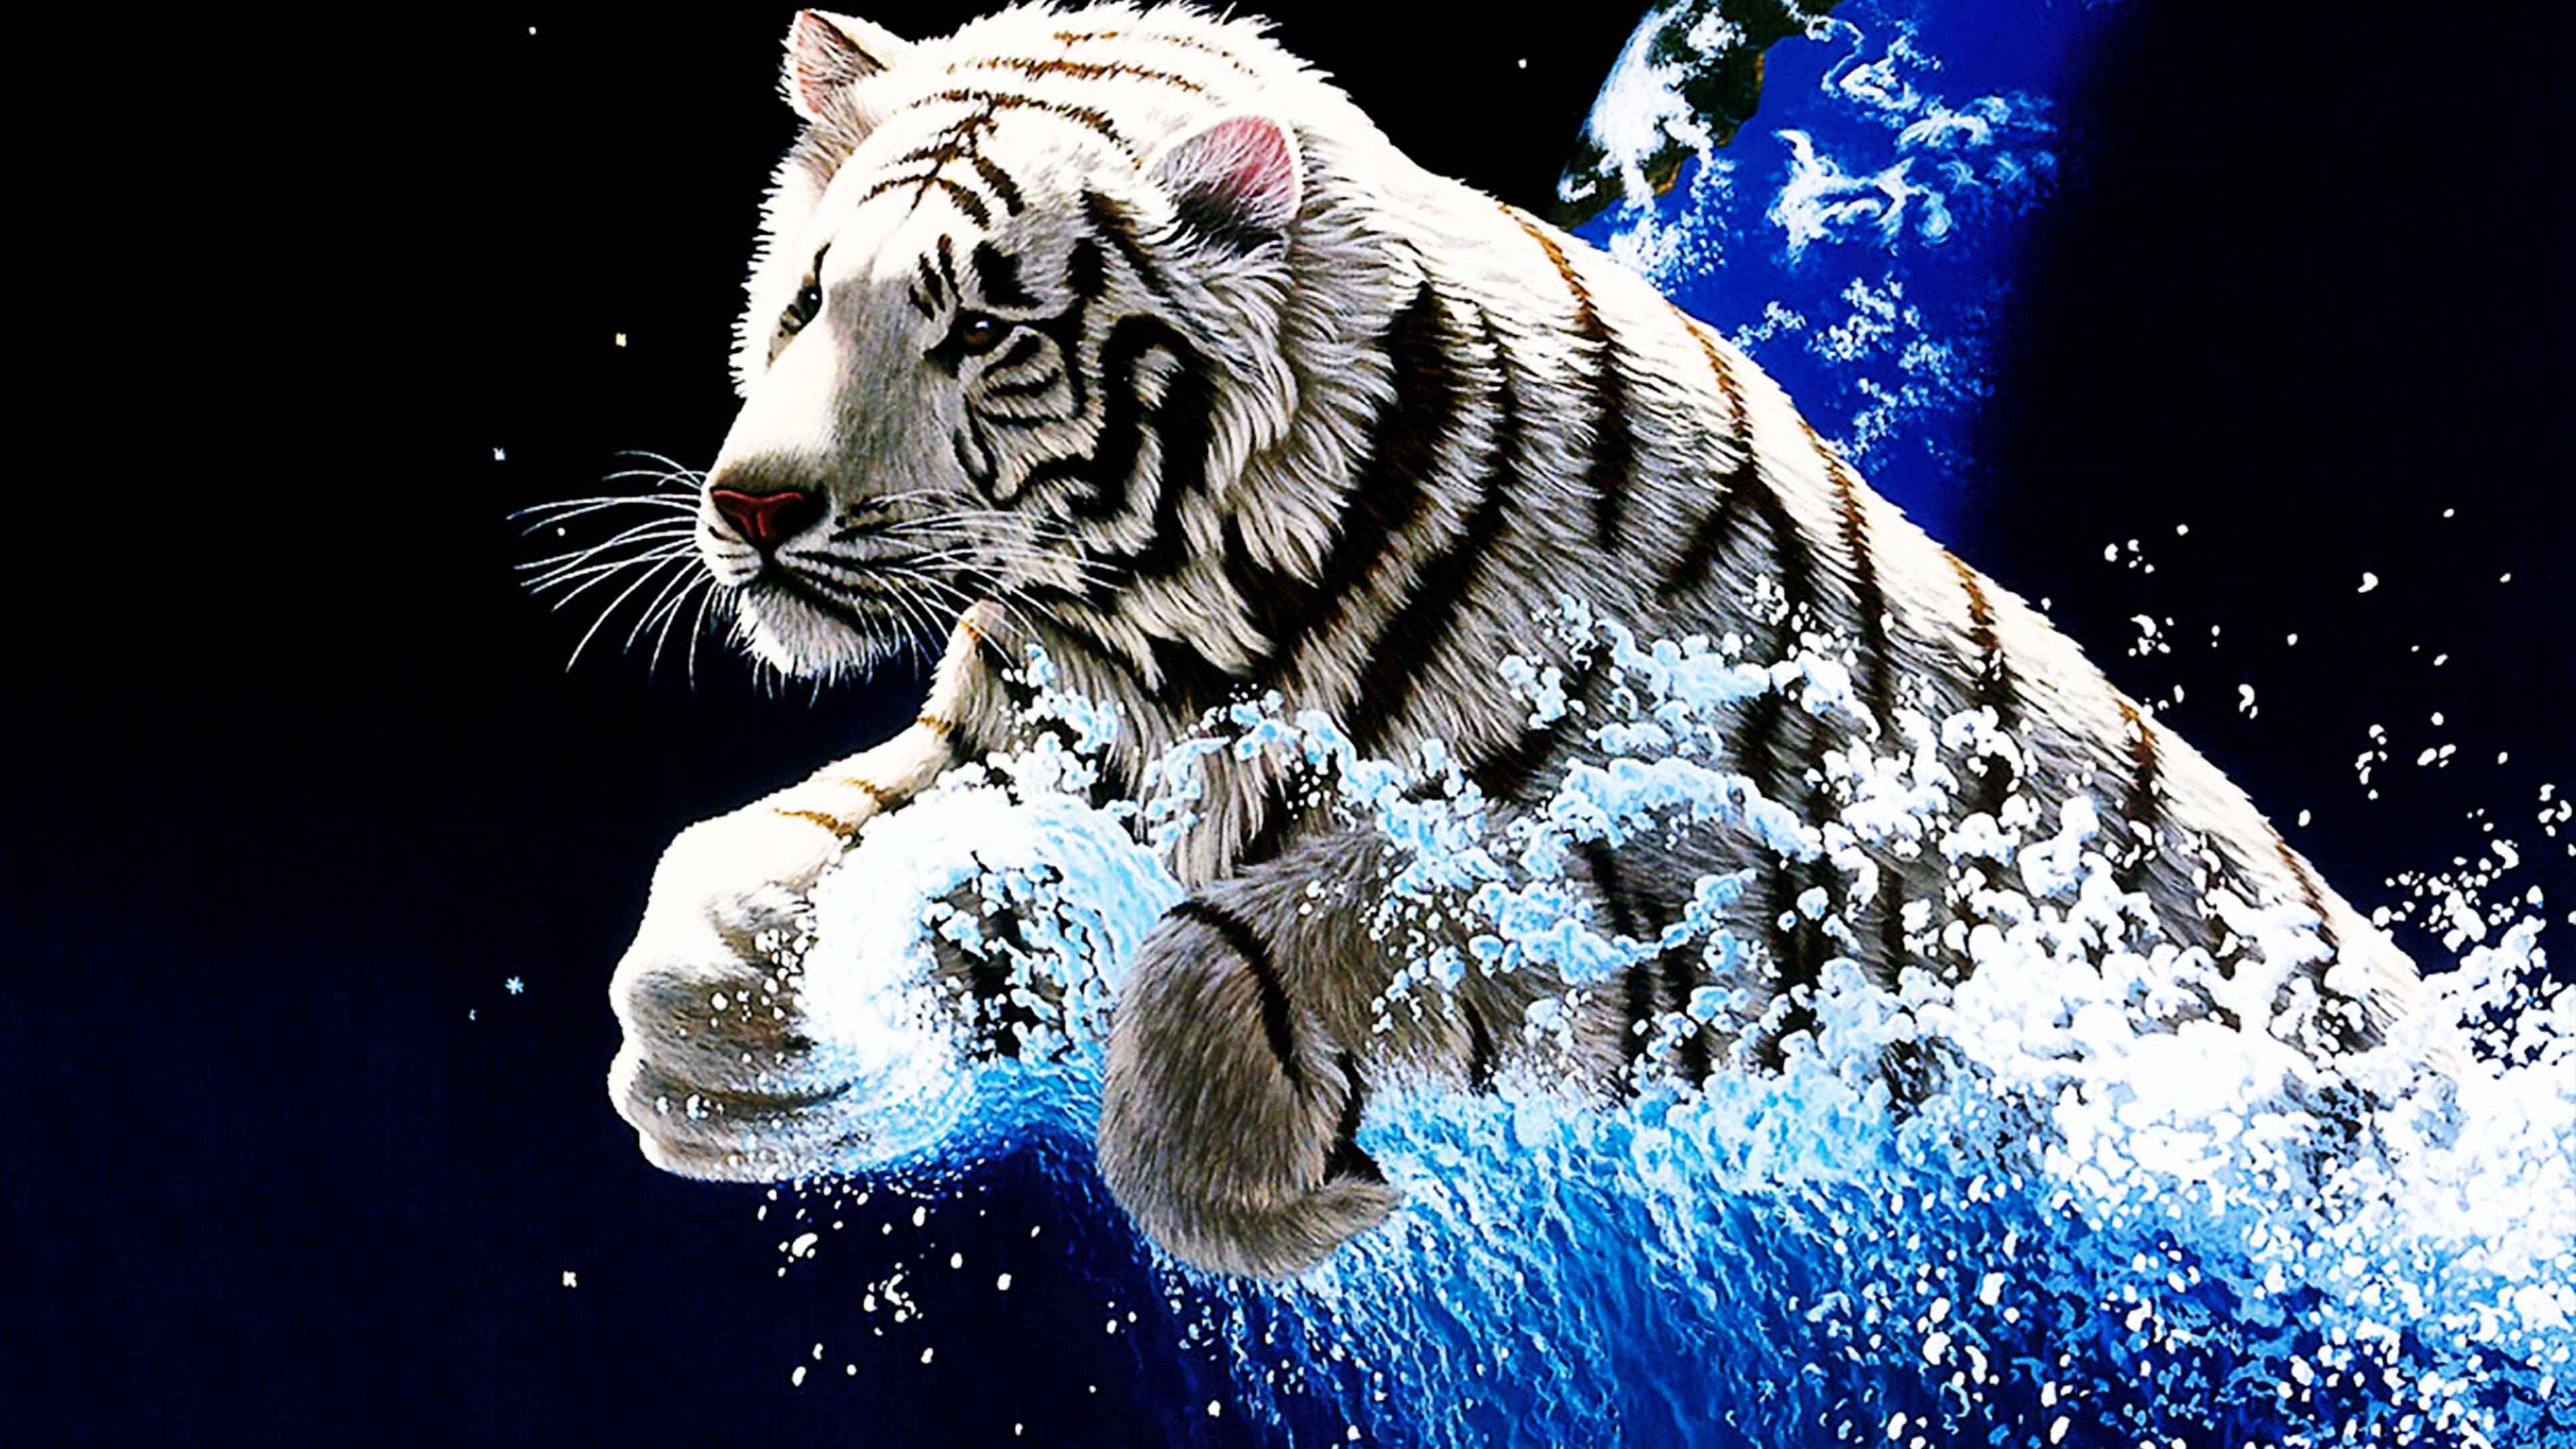 3d Tiger wallpaper by JULIANNA  Download on ZEDGE  2193  Tiger  wallpaper Animal wallpaper Wallpaper